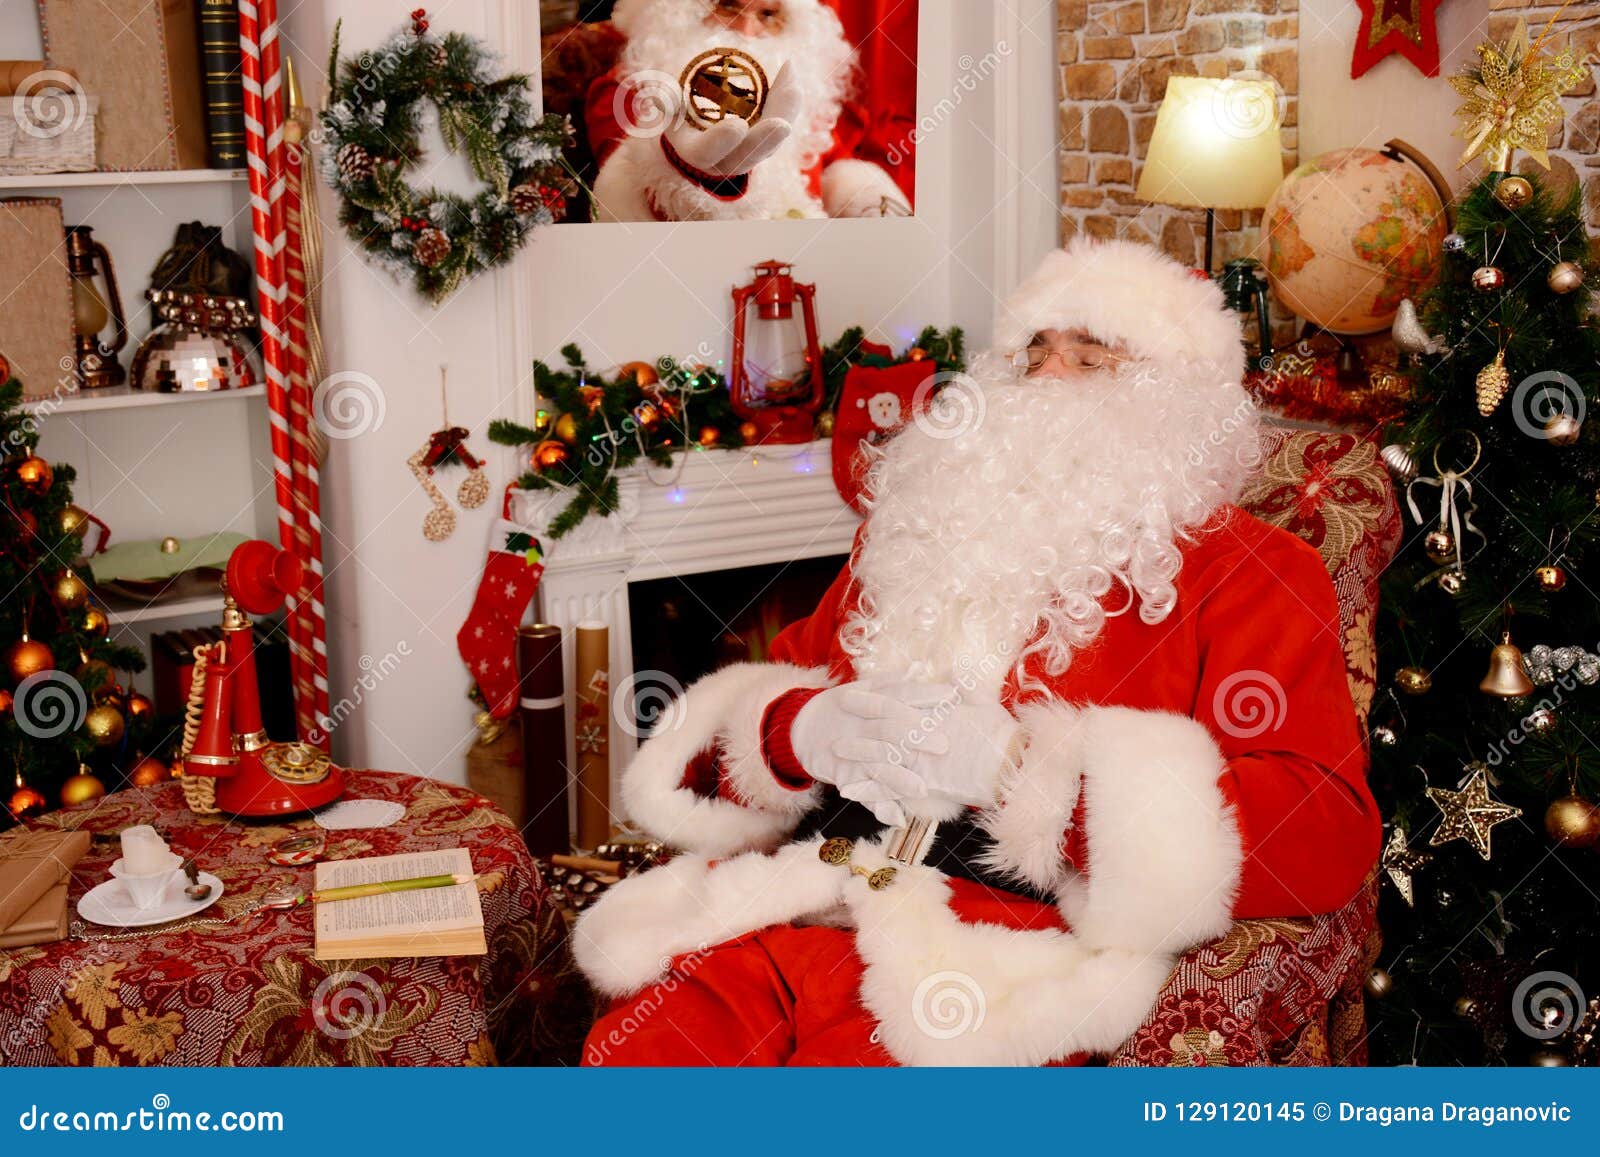 Put Santa In Your Living Room